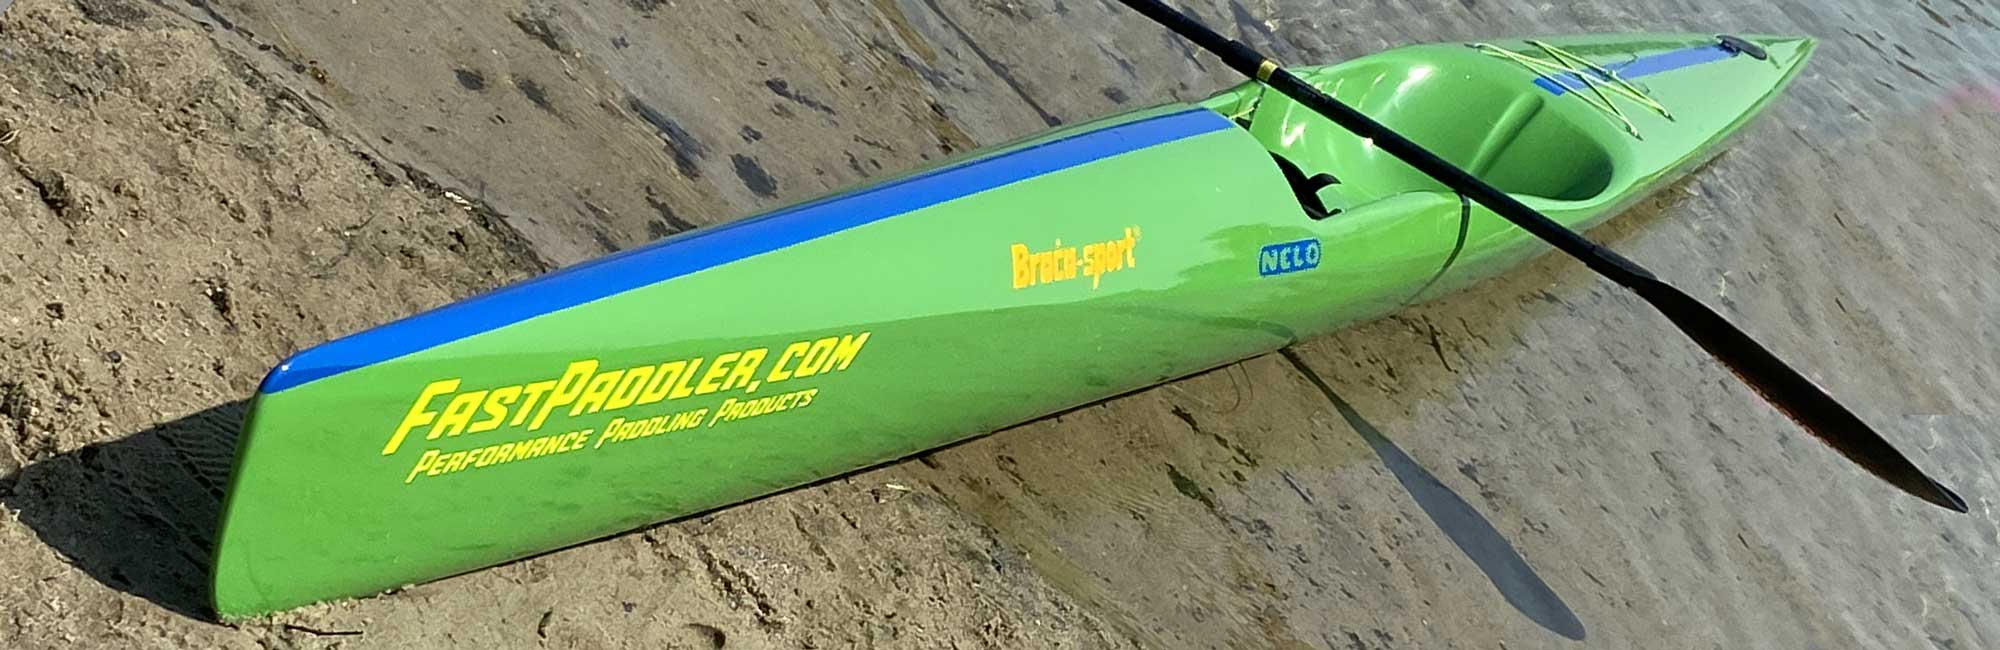 Nelo 560 surf ski for sale! Excelllent condition, green and blue